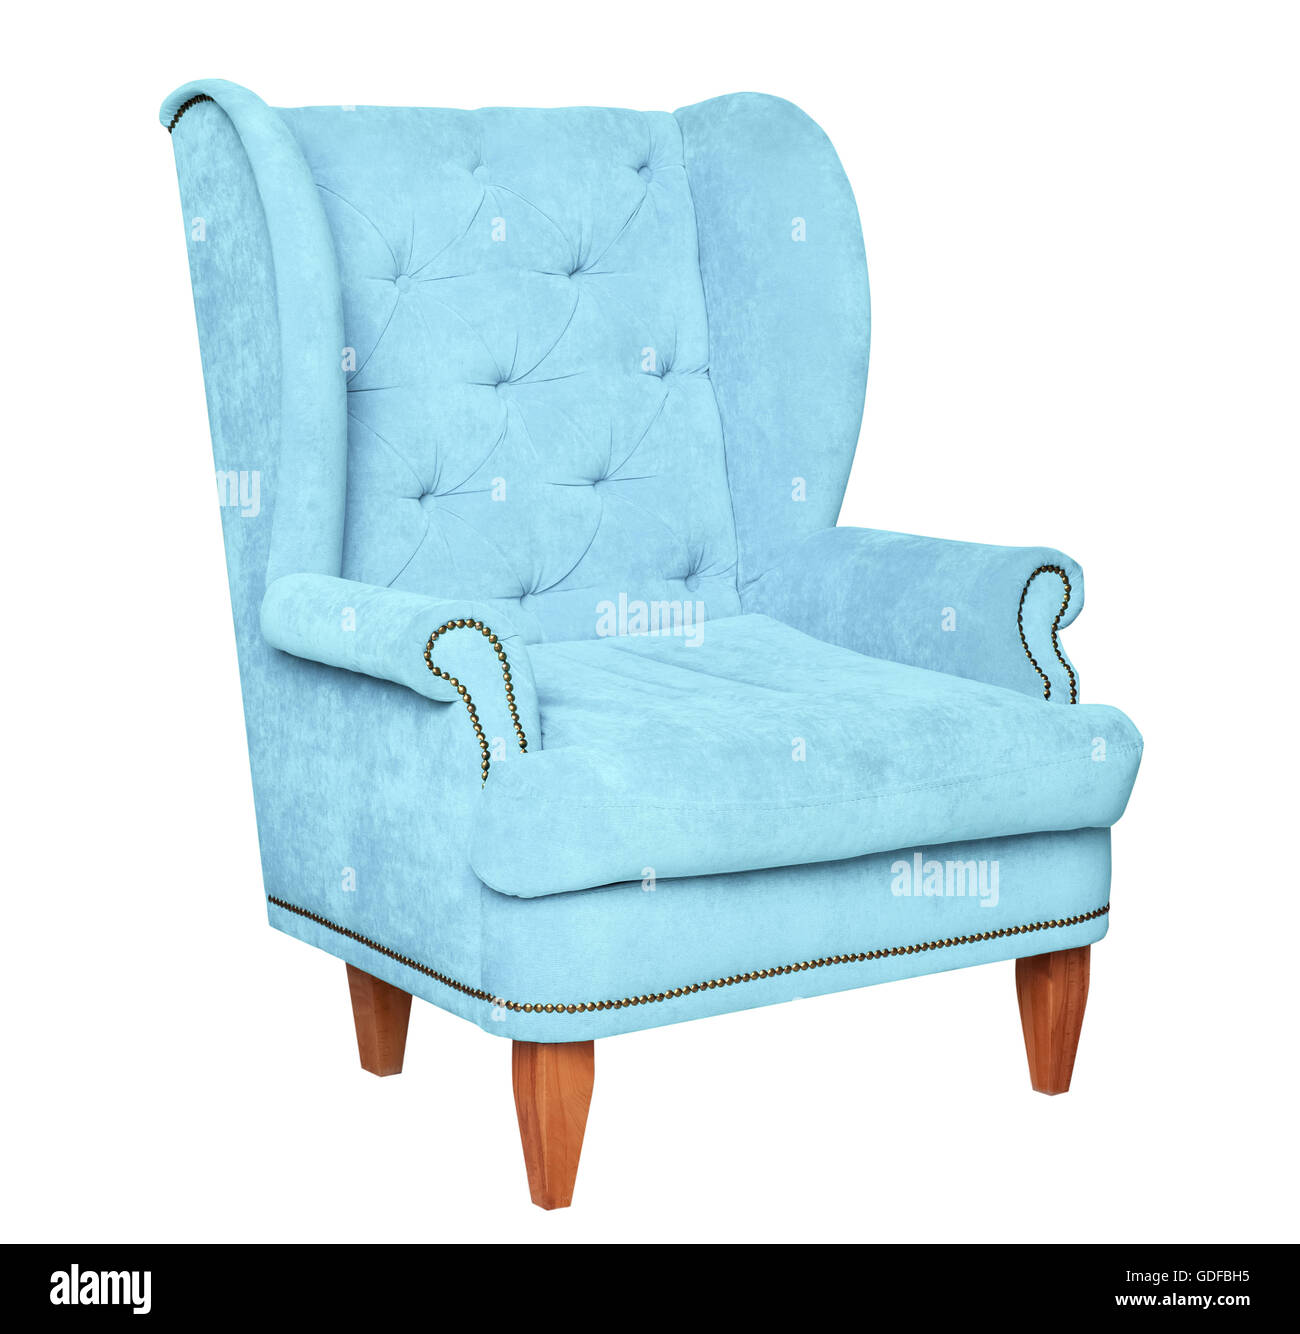 Light blue textile chair isolated Stock Photo